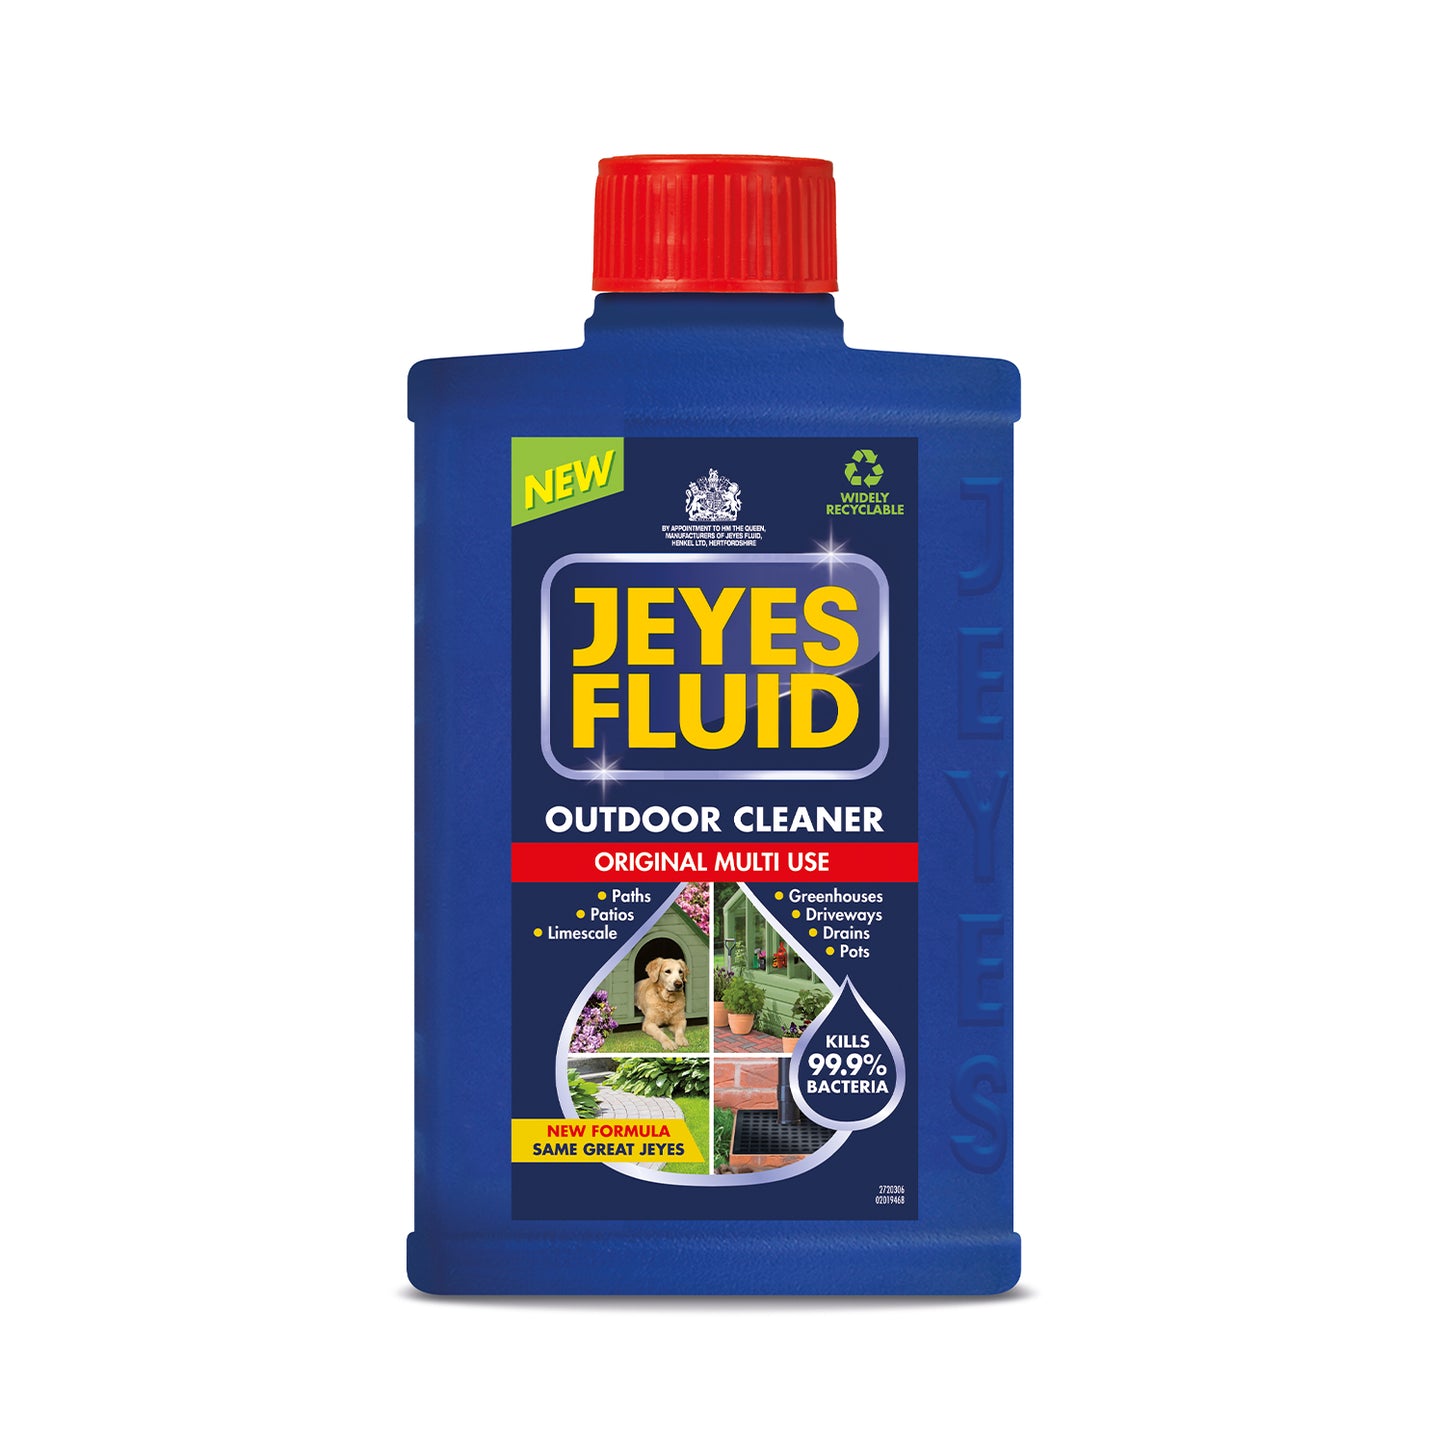 Jeyes Fluid Outdoor Cleaner & Disinfectant